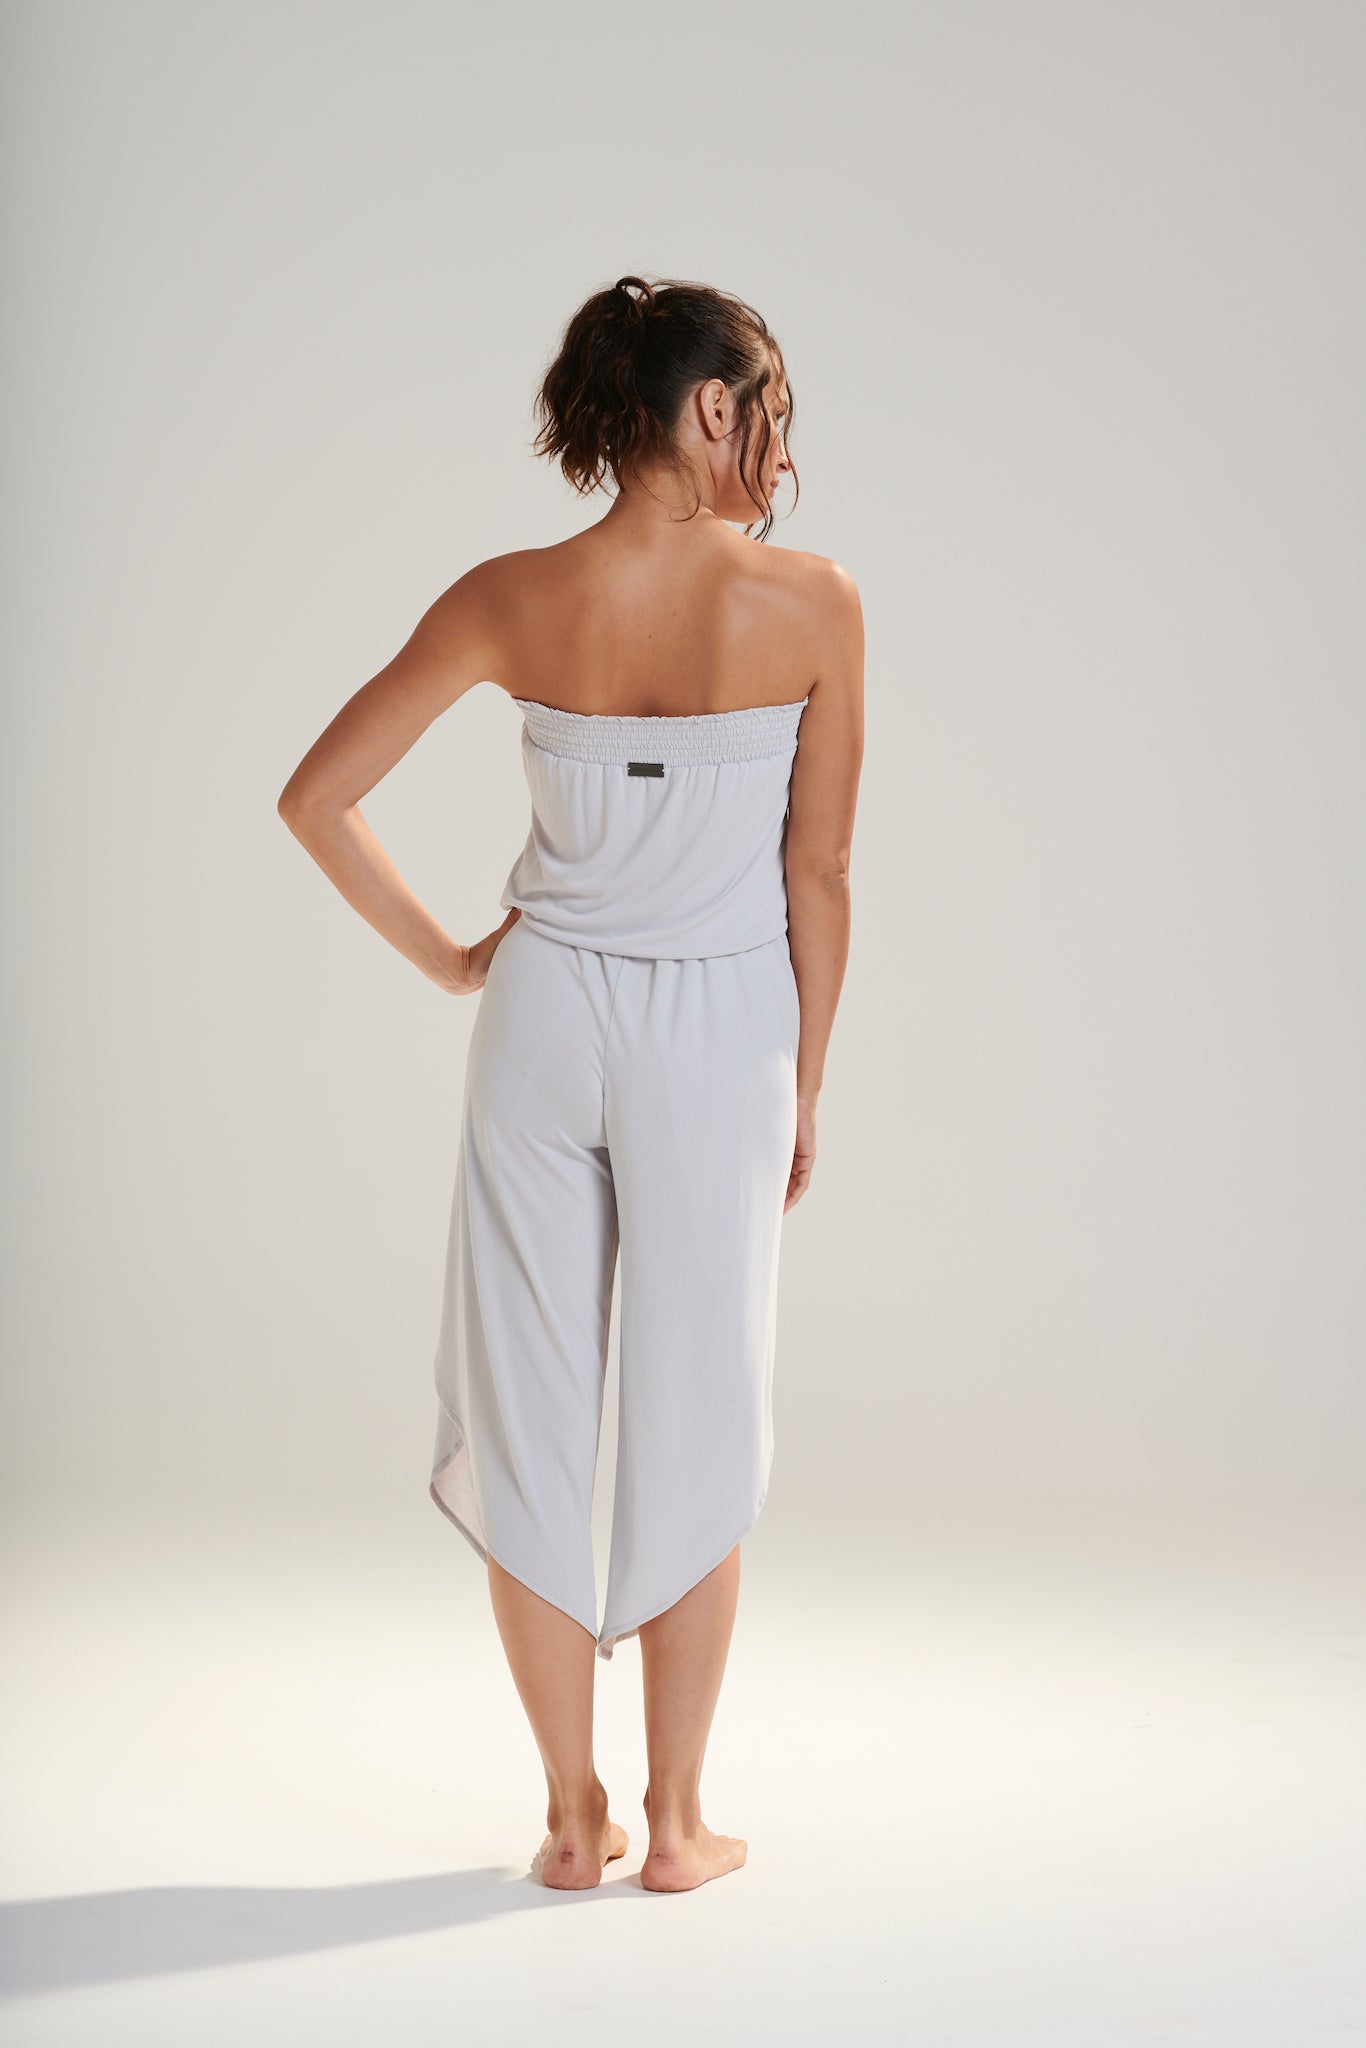 FREYA JUMPSUIT BEECHWOOD MODAL JERSEY SHIRRED BODICE AND PETAL WRAP LEG WITH ELASTIC WAIST AND REMOVABLE TIE IN WISP WASHED PALE GREY BACK VIEW